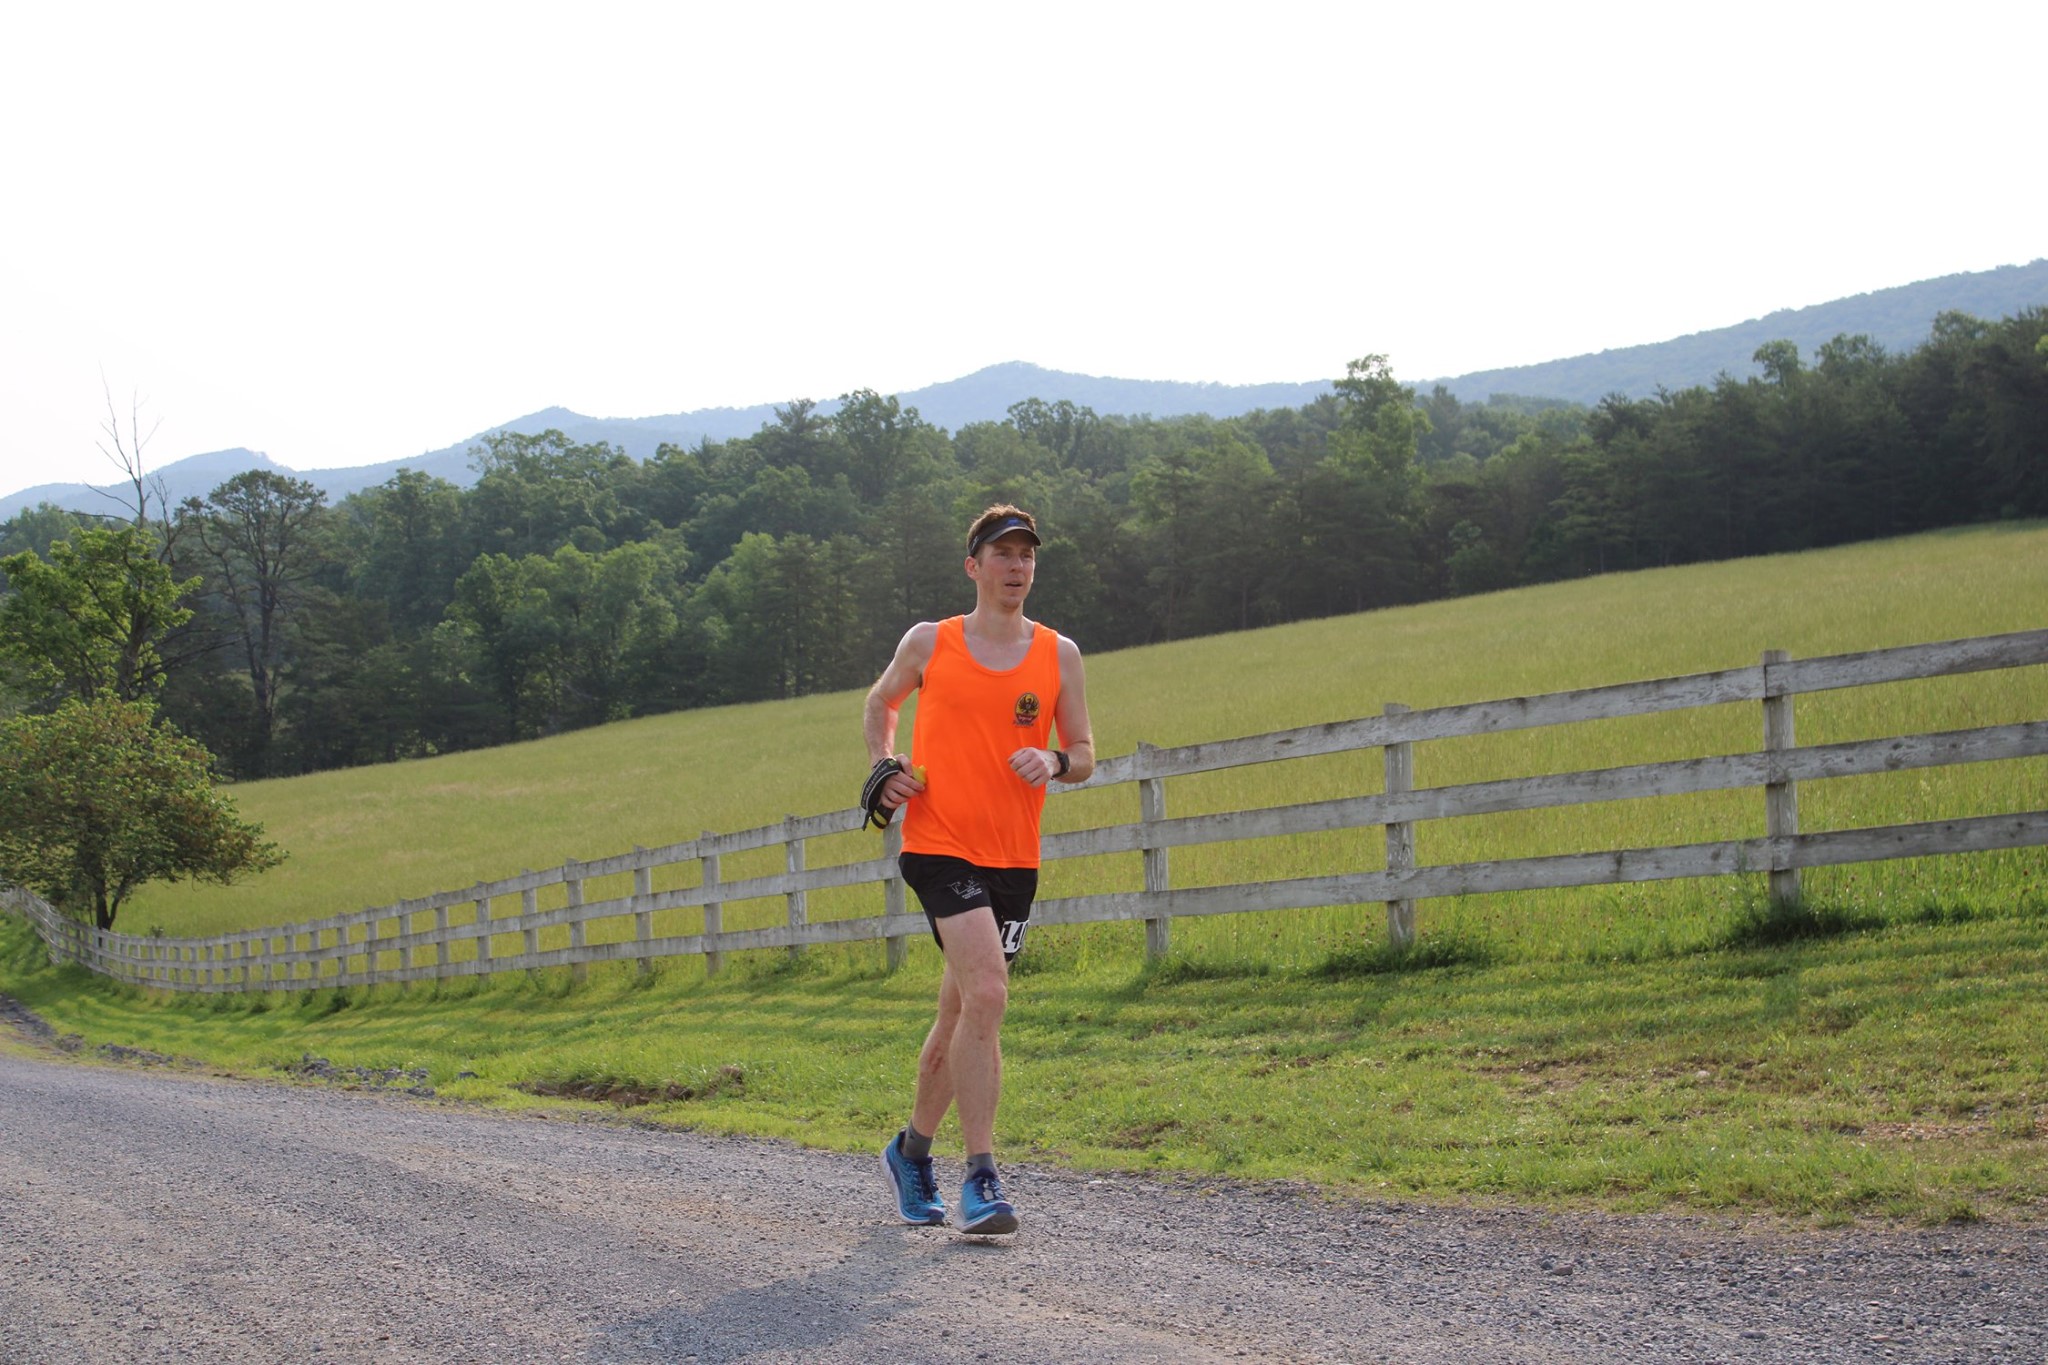 runner moving along gravel road in front of white farm fencing